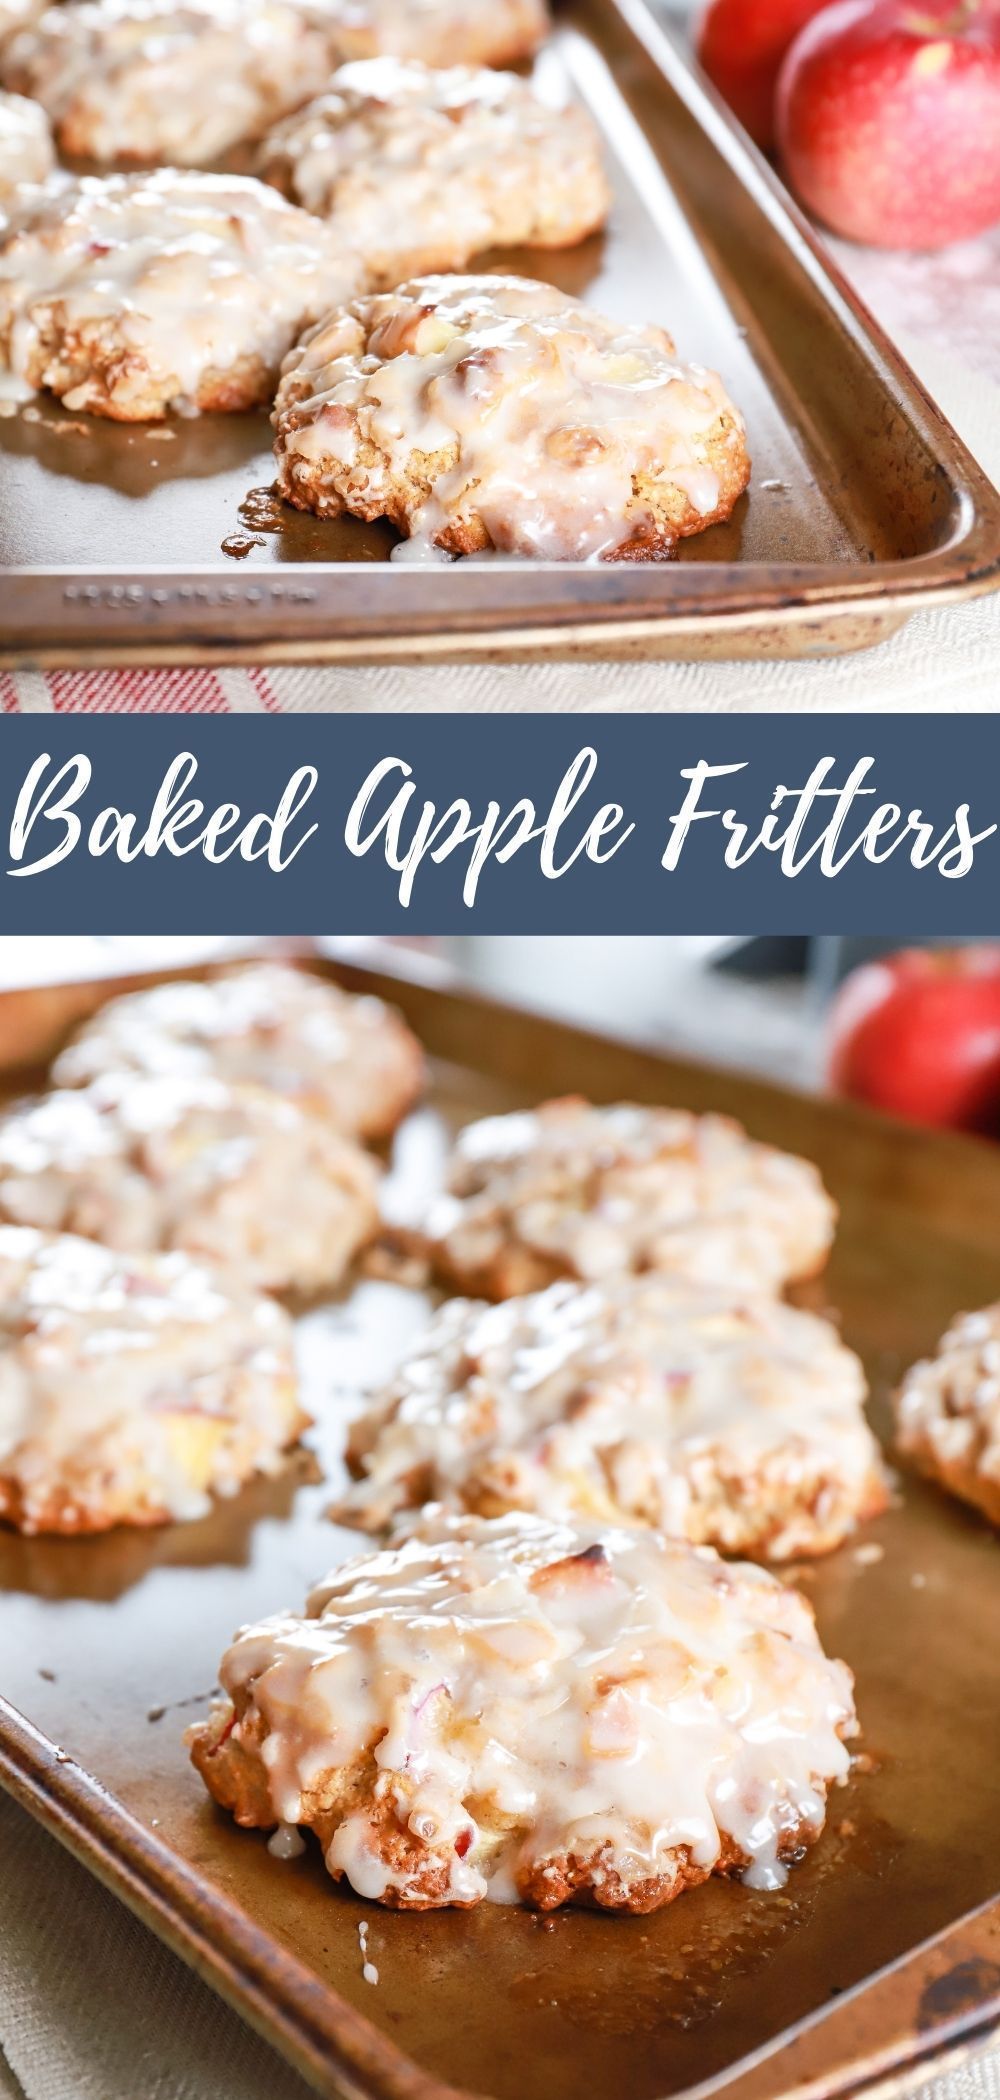 Baked Apple Fritters - A Kitchen Addiction